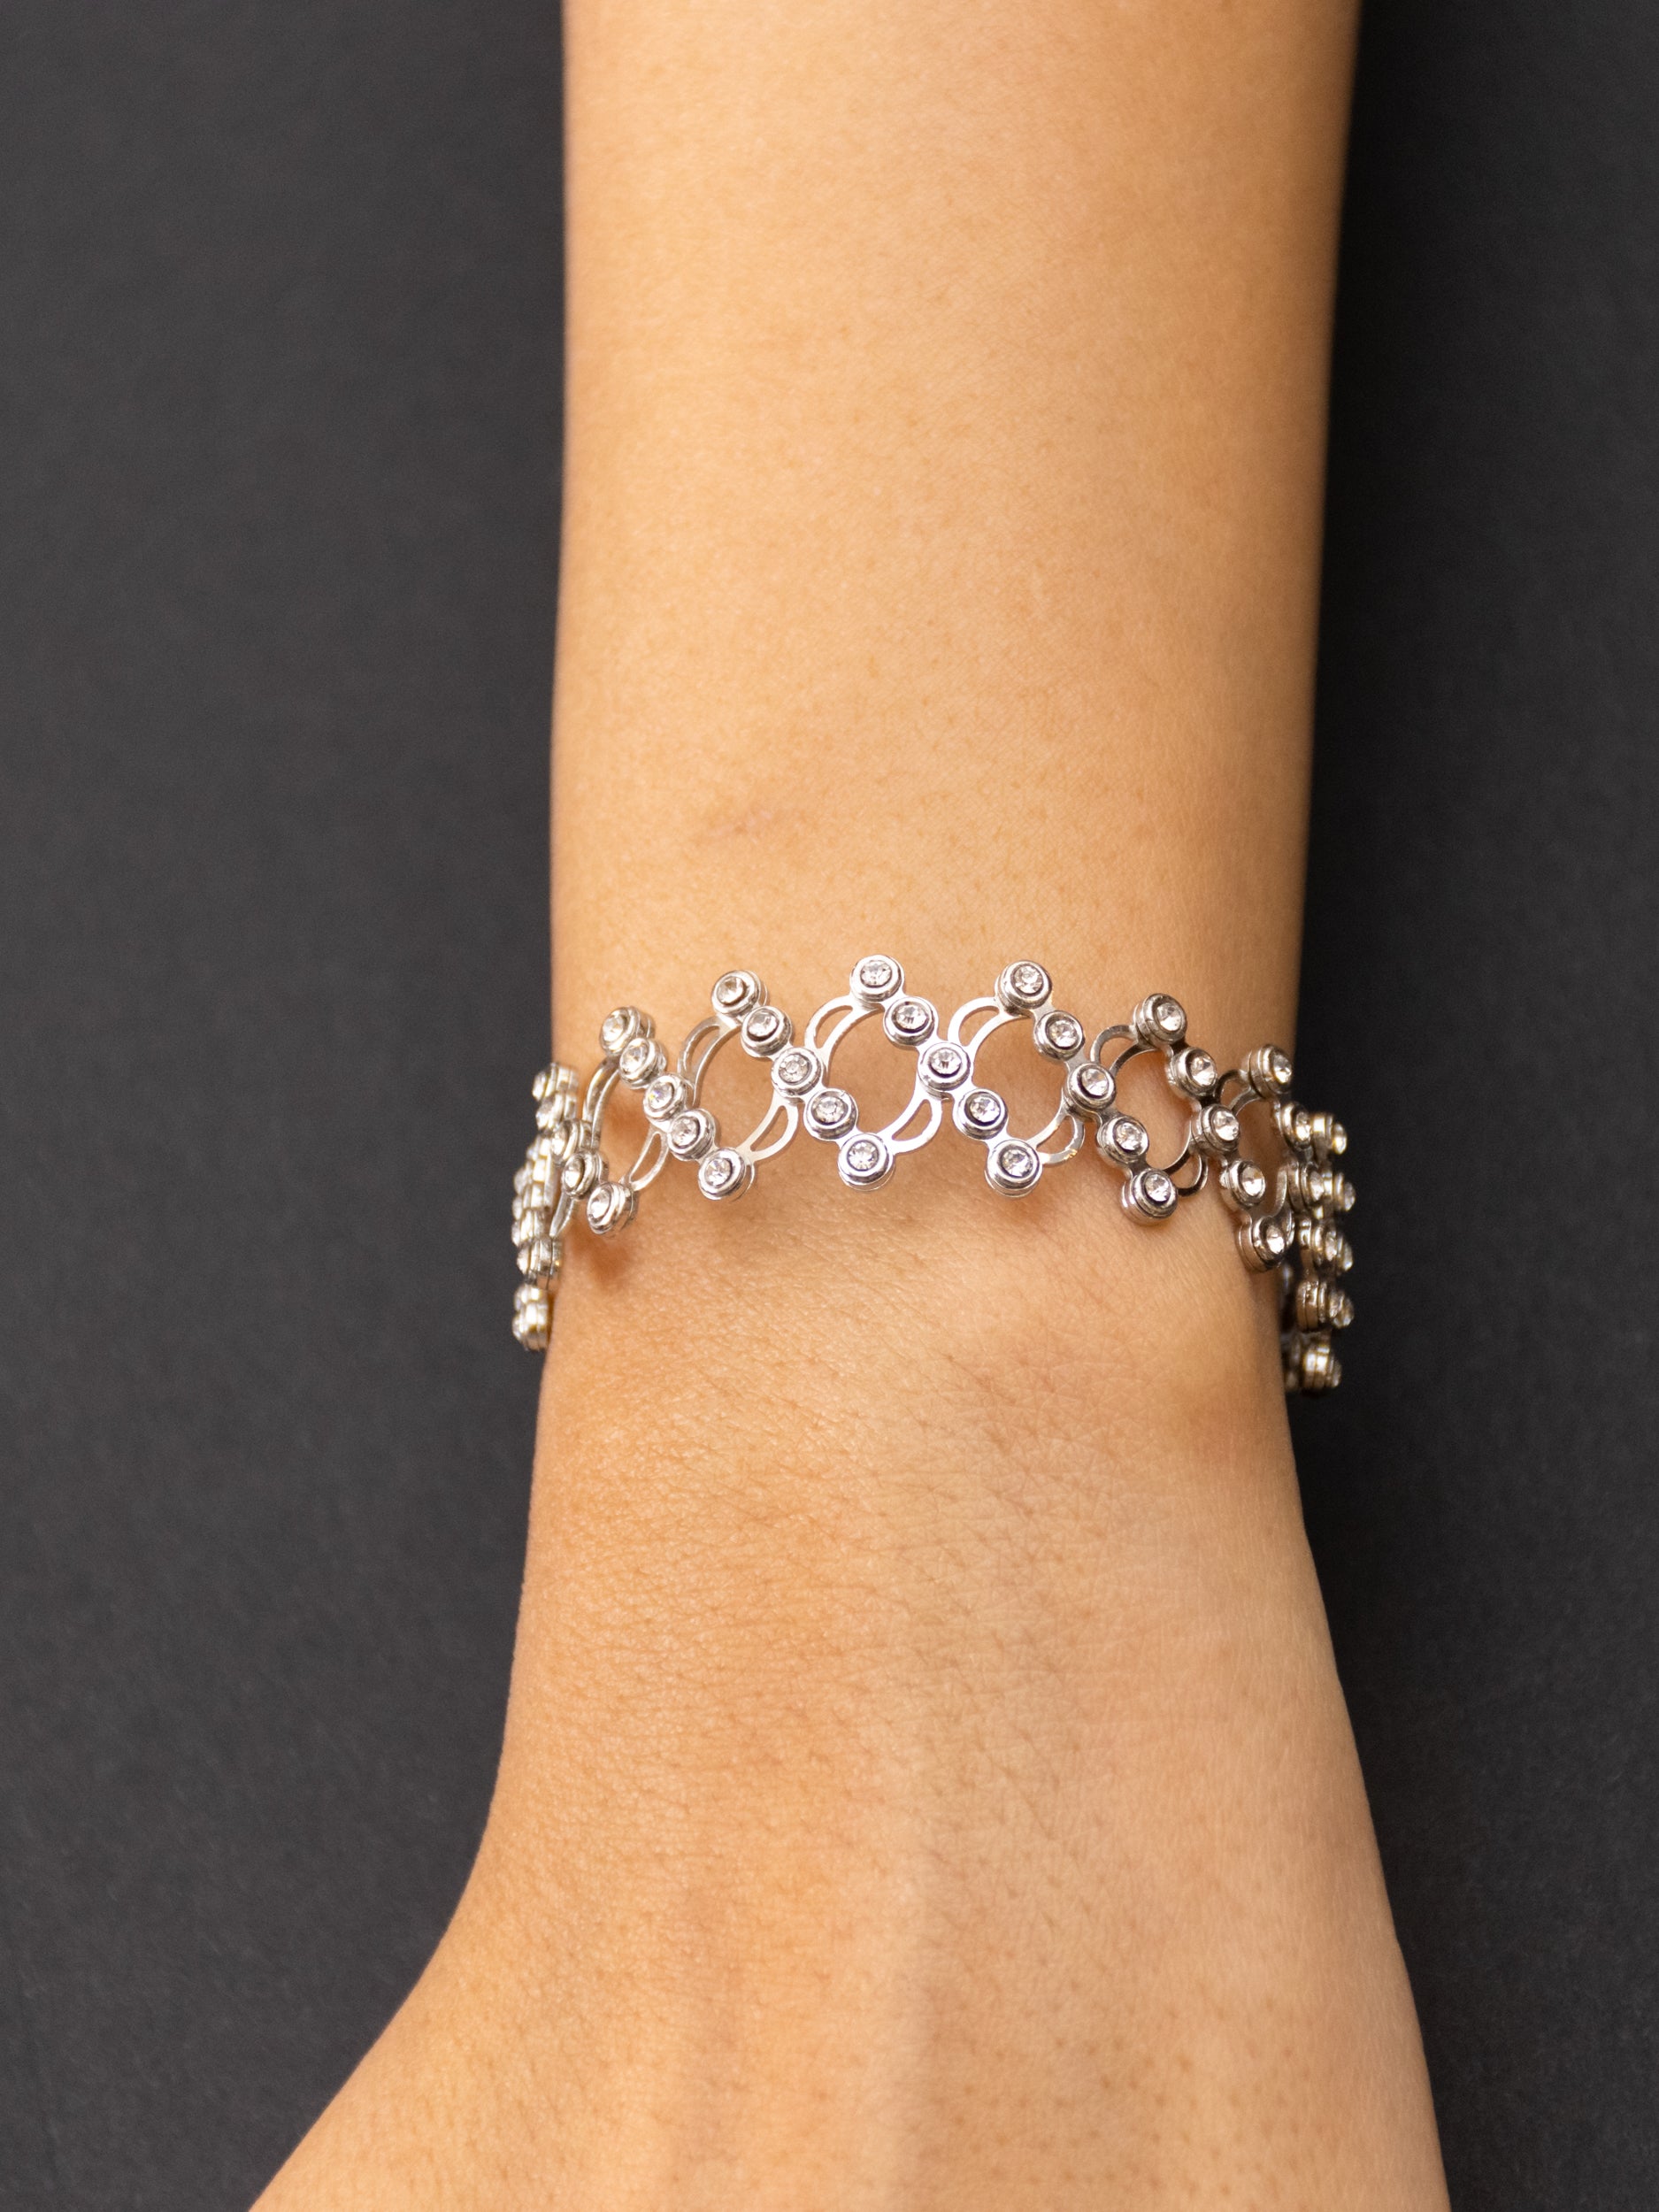 Femnmas Silver Butterfly Bracelet With Ring Buy Femnmas Silver Butterfly  Bracelet With Ring Online at Best Price in India  Nykaa